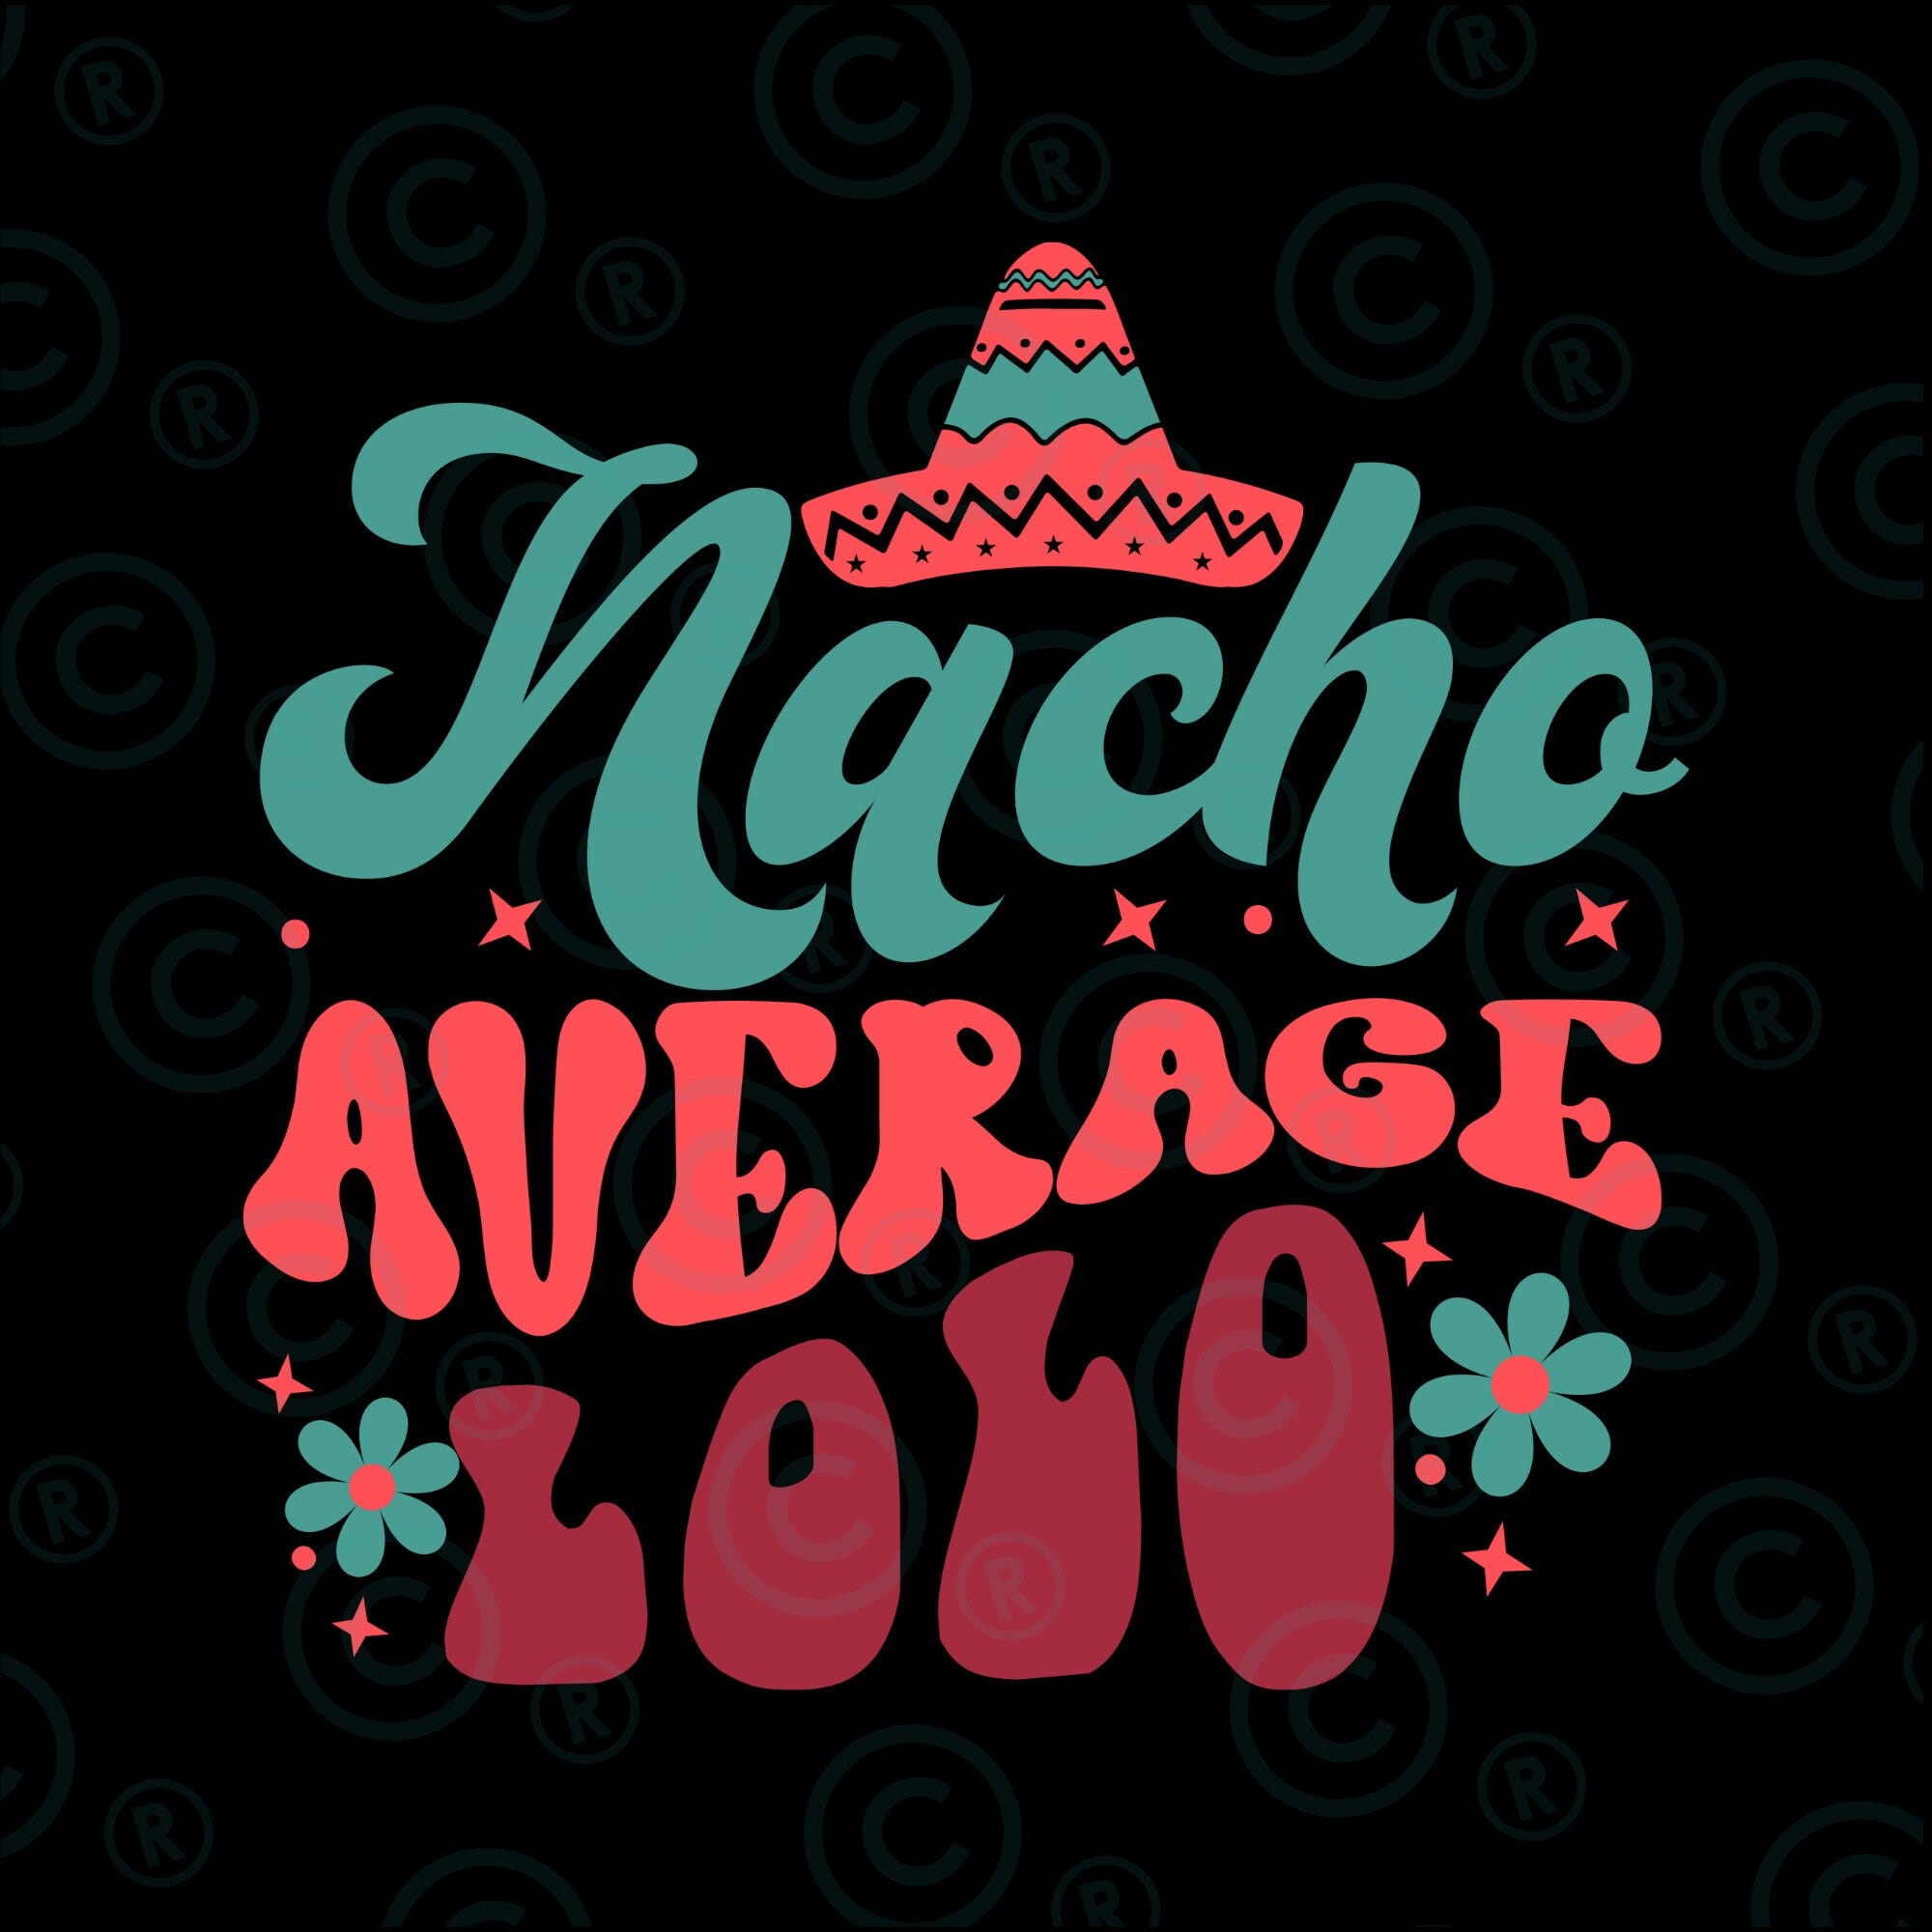 Nacho Average lolo svg Png, Nacho Average Family  svg Png, Fiesta Party svg Png, Cinco De Mayo lolo svg Png, Mexican  svg Png, lolo Gift